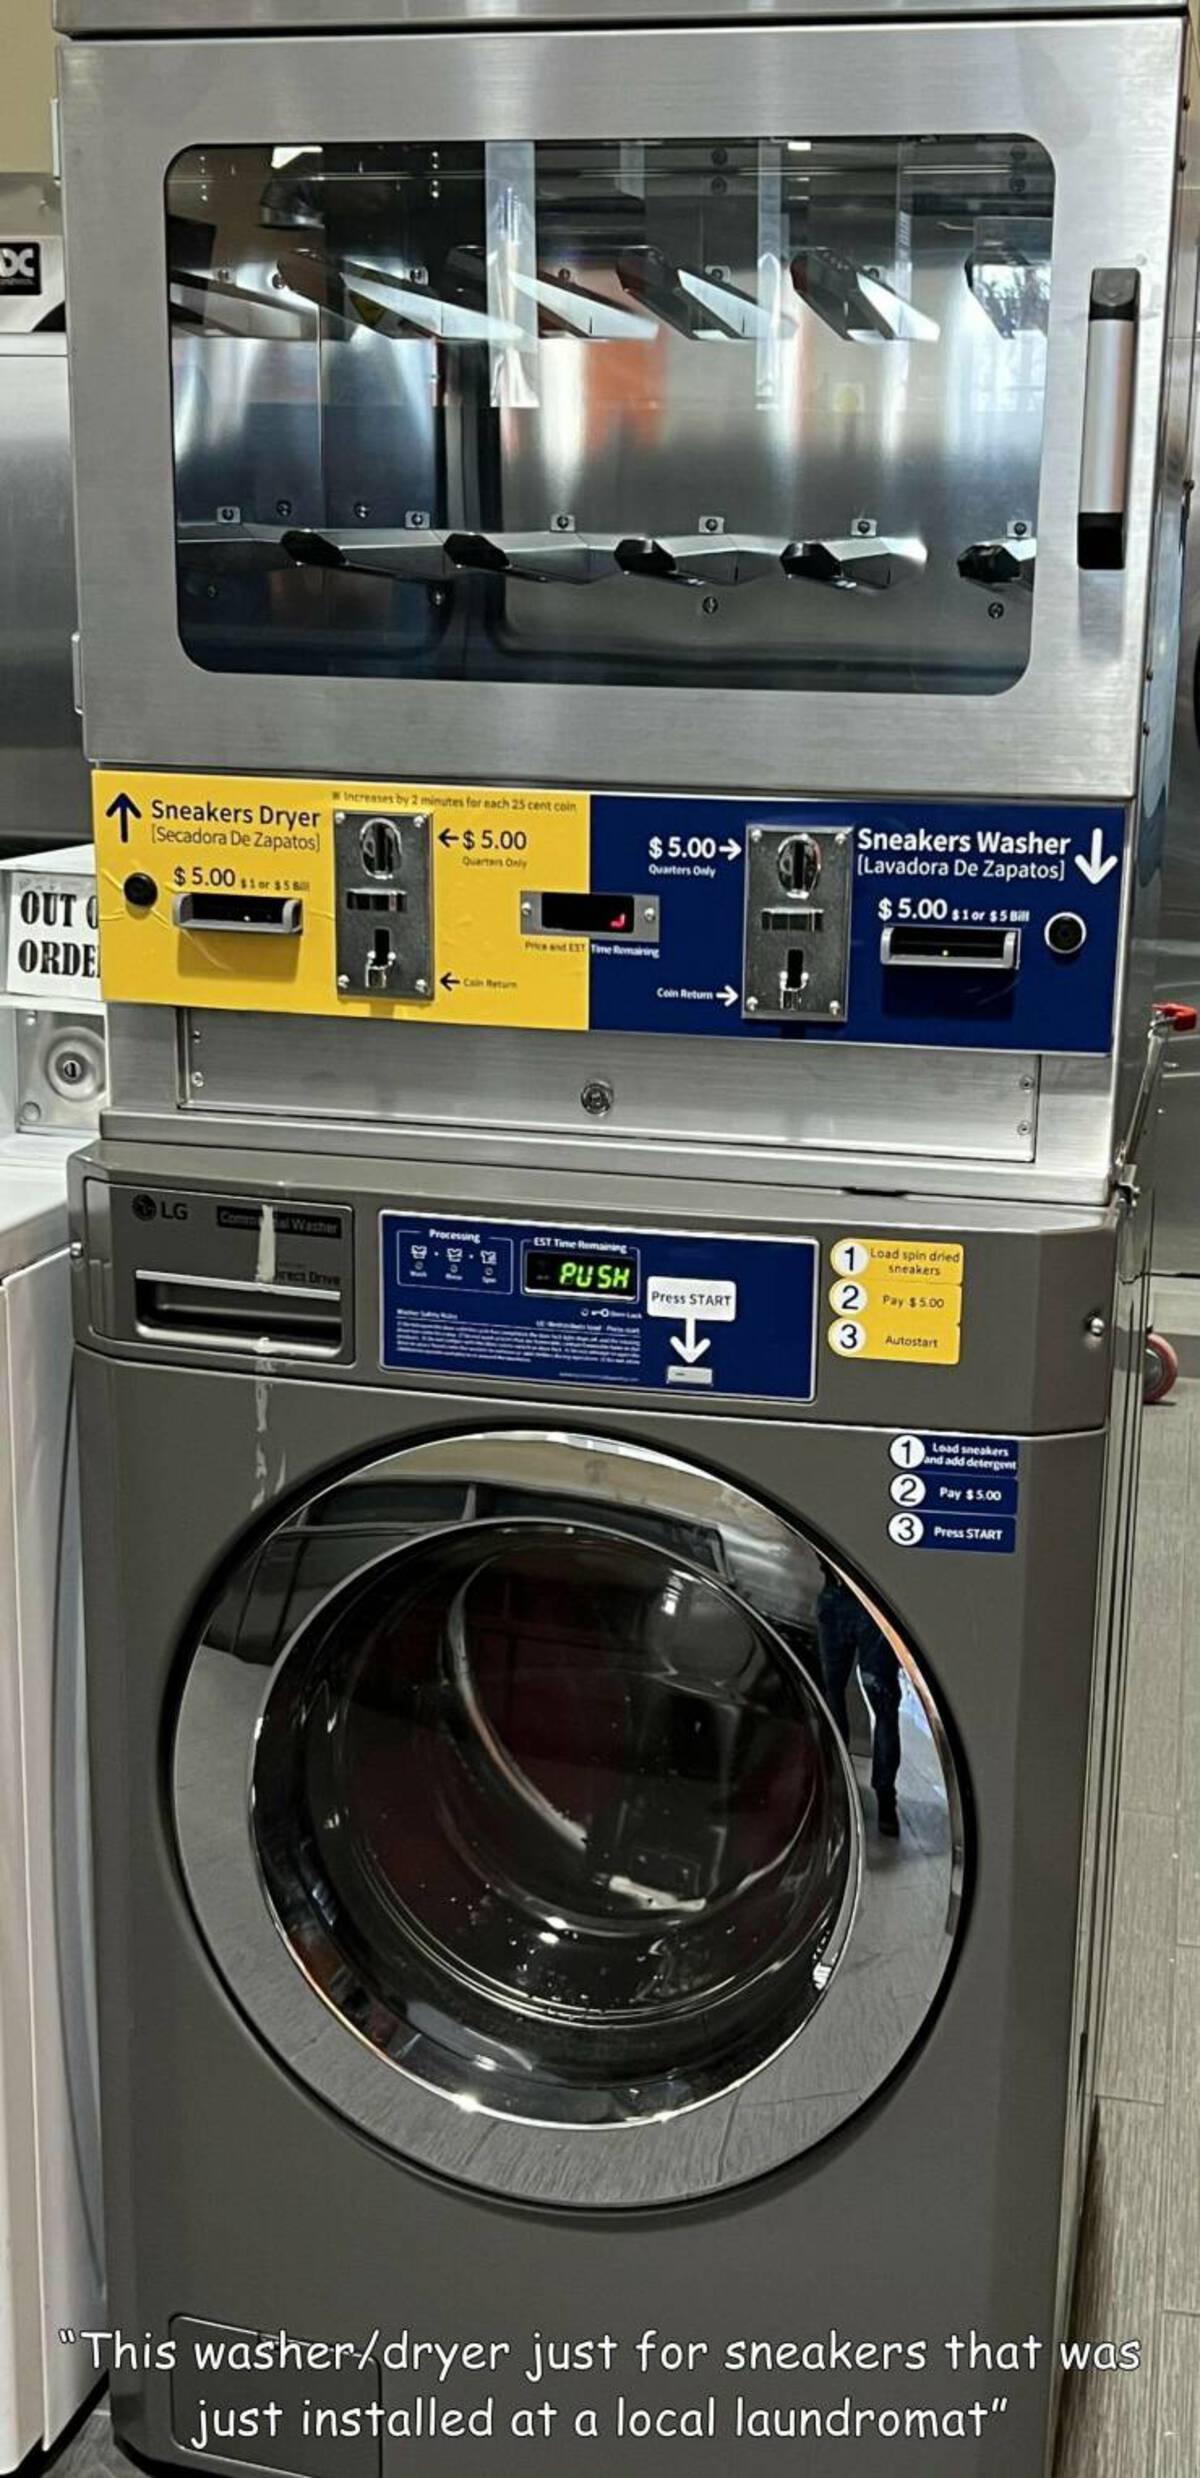 washing machine - 18 Out O Orde Sneakers Dryer Secadora De Zapatos $5.00 $1 or $5 Lg Commal Washer Jrect Drive O O Increases by 2 minutes for each 25 cent coin $5.00 Quartars Only Processing Prsand Ext Time Remaining Est Time Remaining Push O $5.00 Quarte